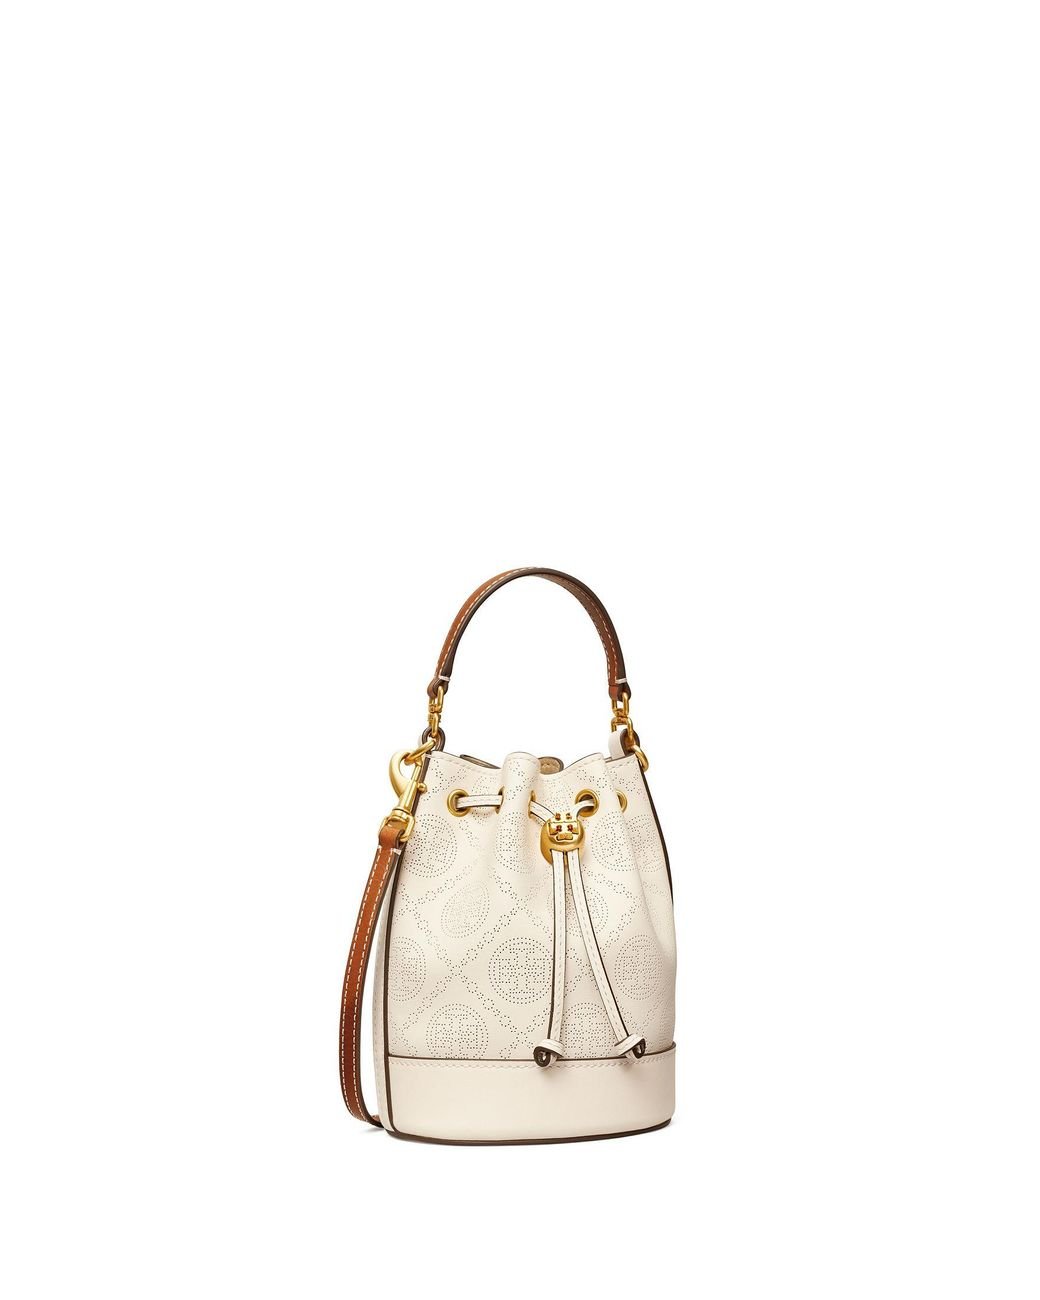 Tory Burch Leather Mini T Monogram Perforated Bucket Bag in 